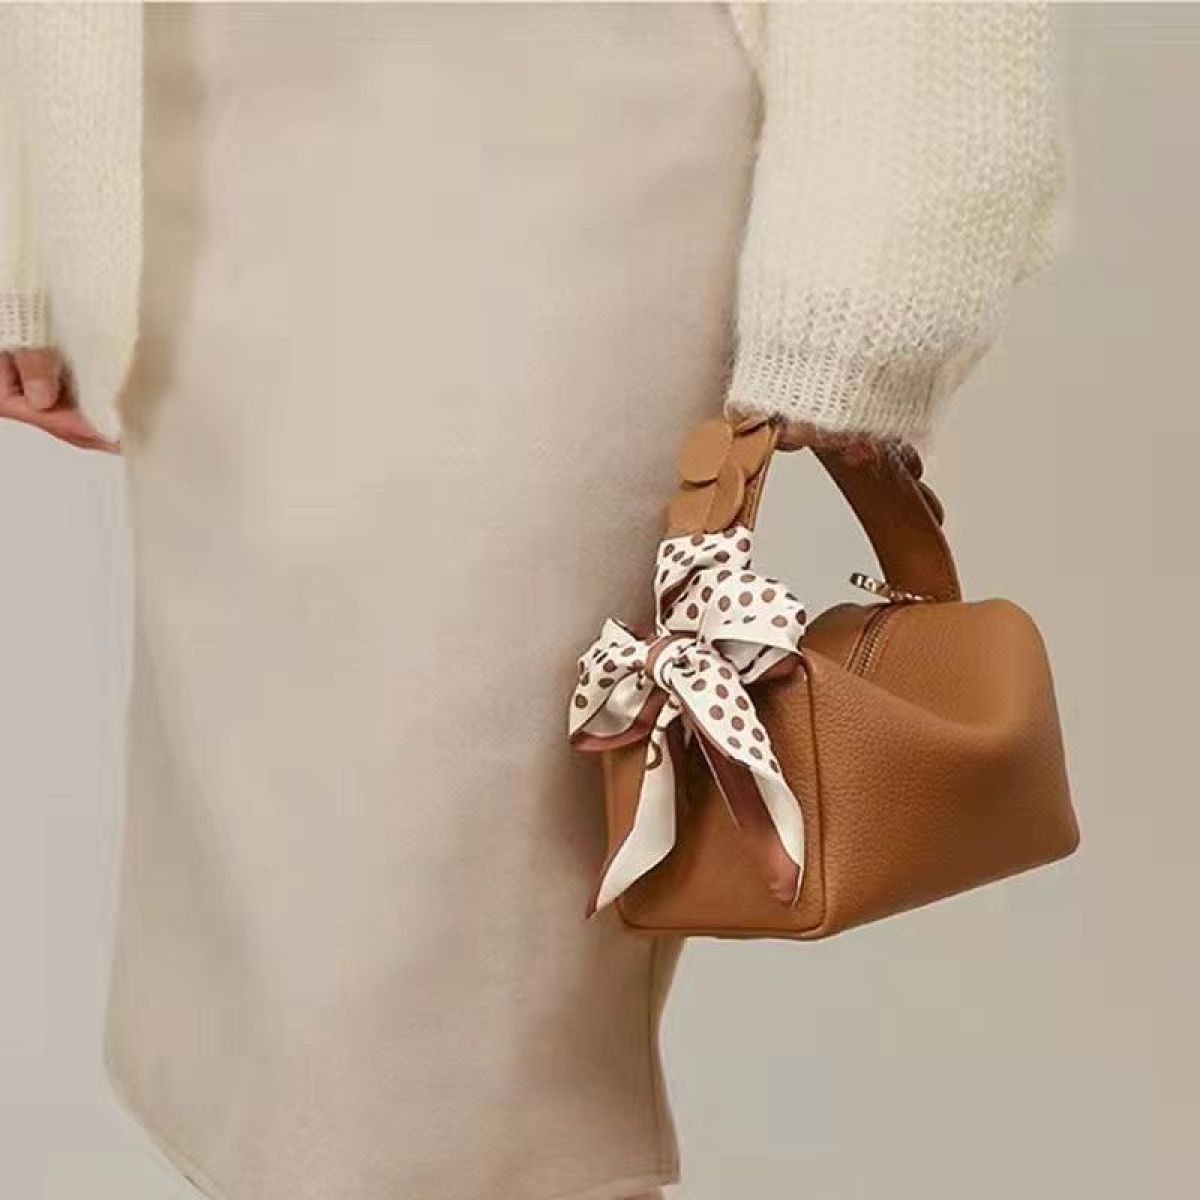 Scarf-wrapped Handle Mini Bag | Art in Aging